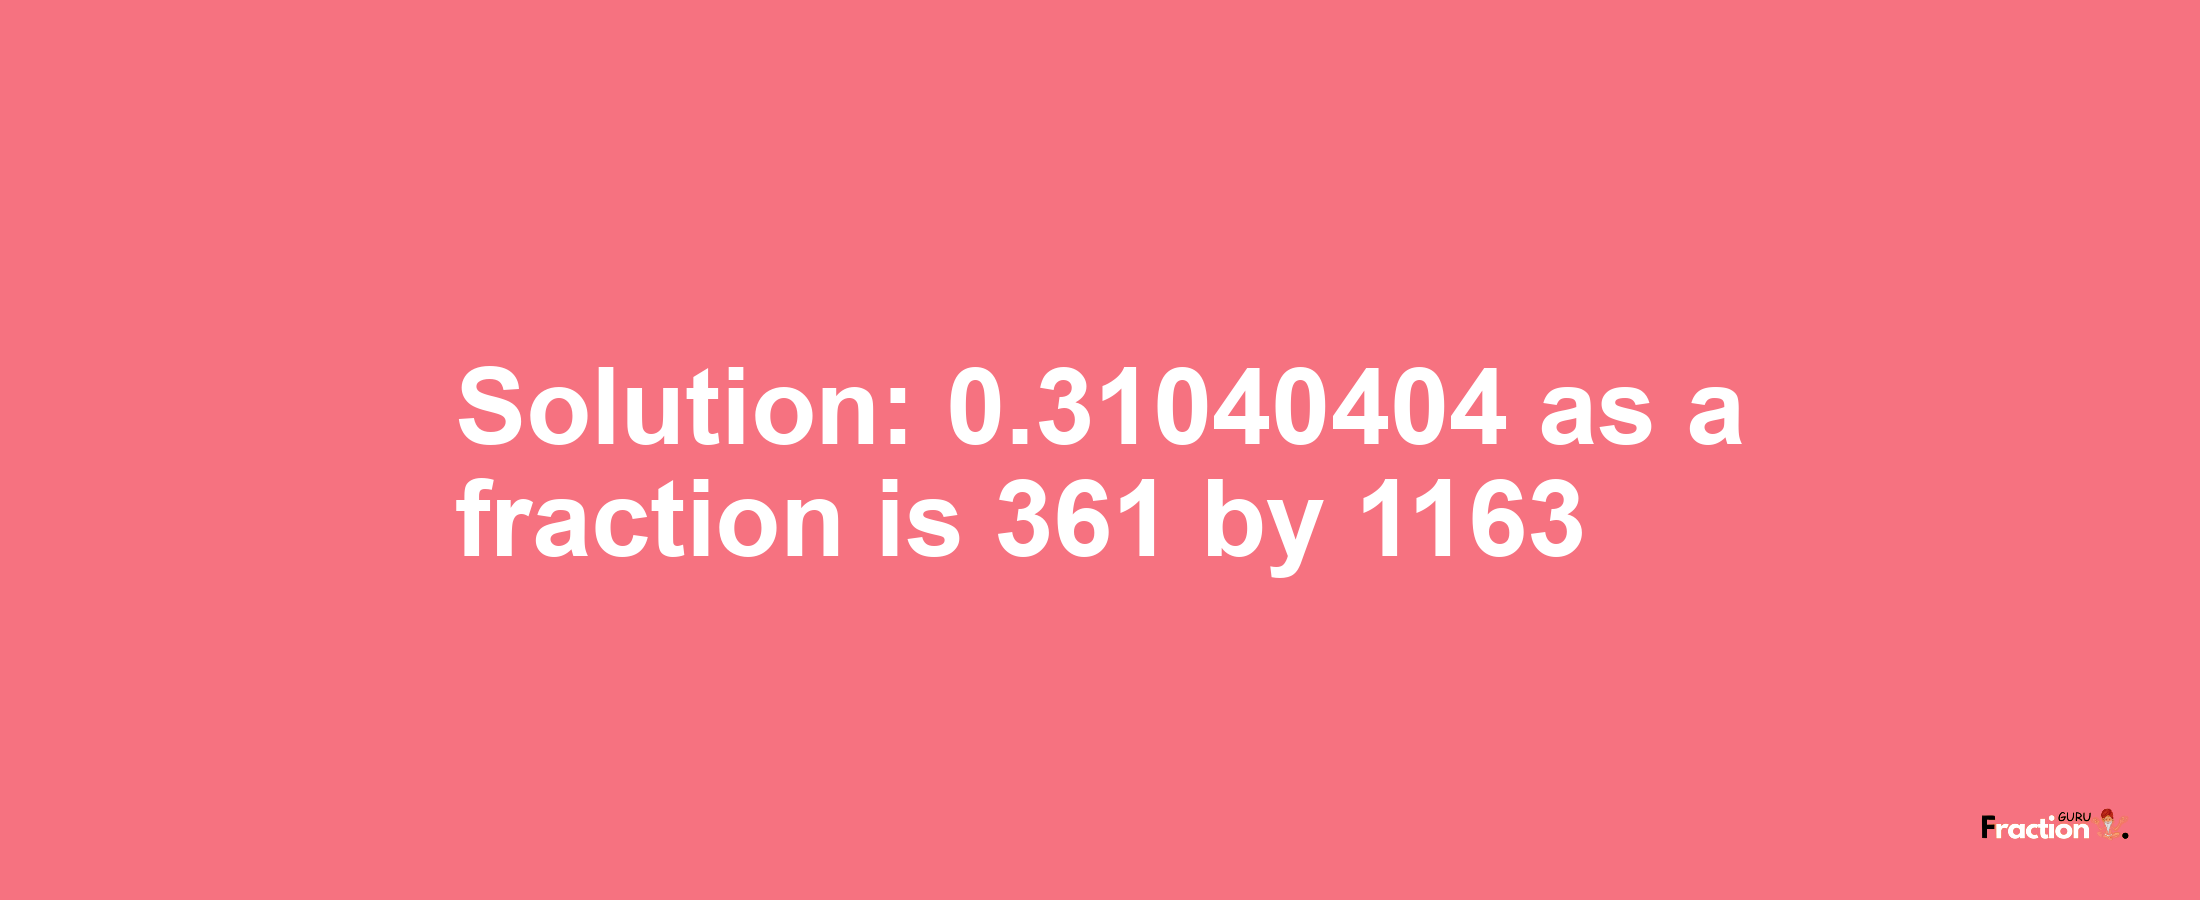 Solution:0.31040404 as a fraction is 361/1163